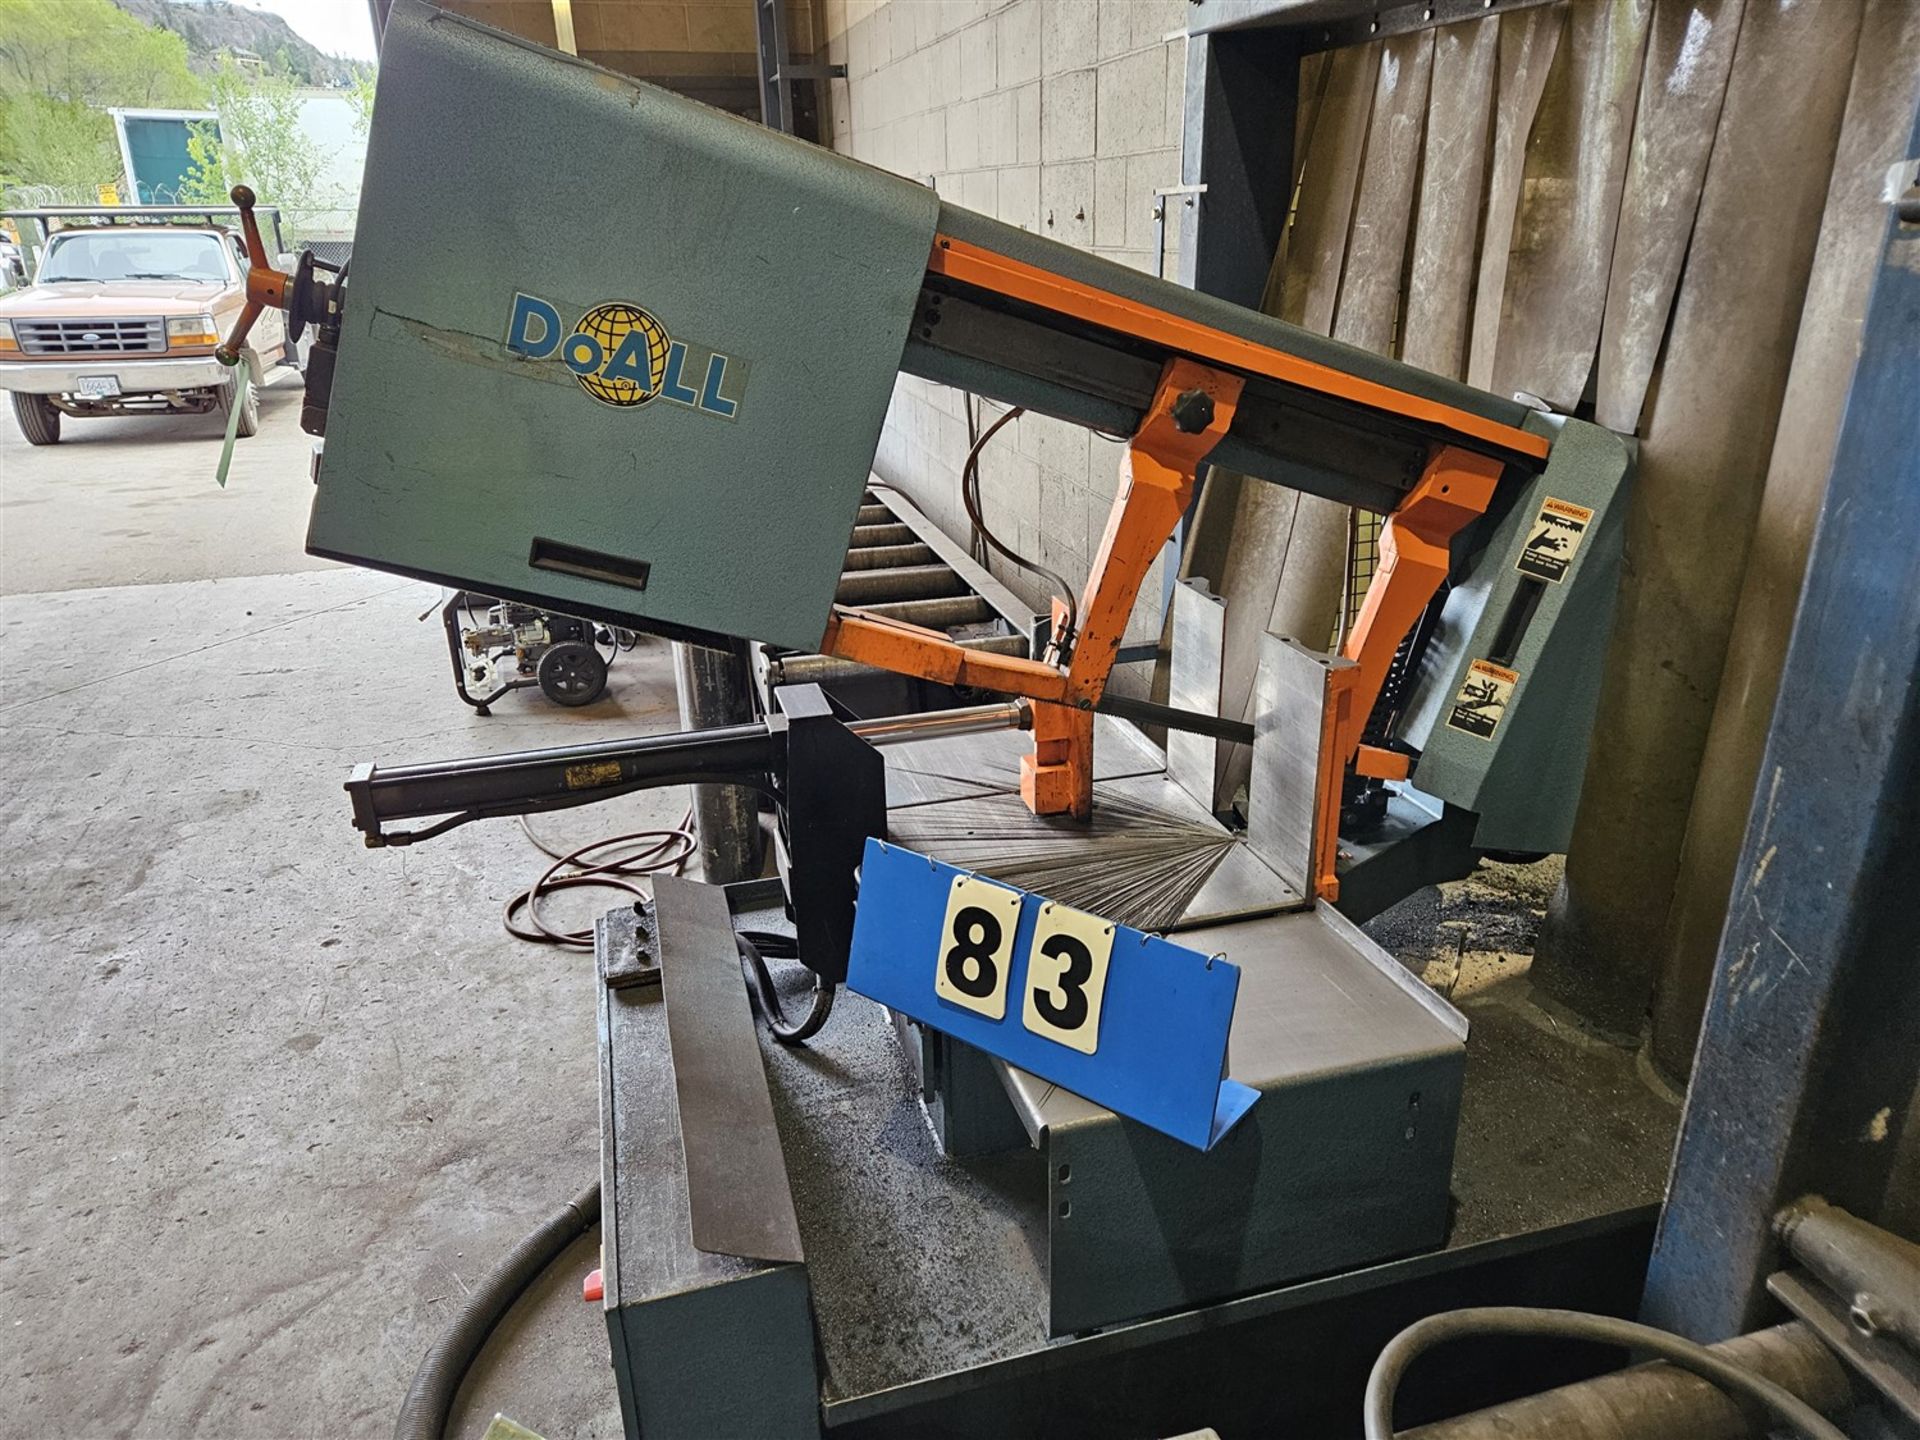 2015 DOALL METAL CUTTING BANDSAW, MODEL 500DS, 460VOLT, 197 IN. BAND LENGTH, S/N 593-15240 - Image 2 of 6